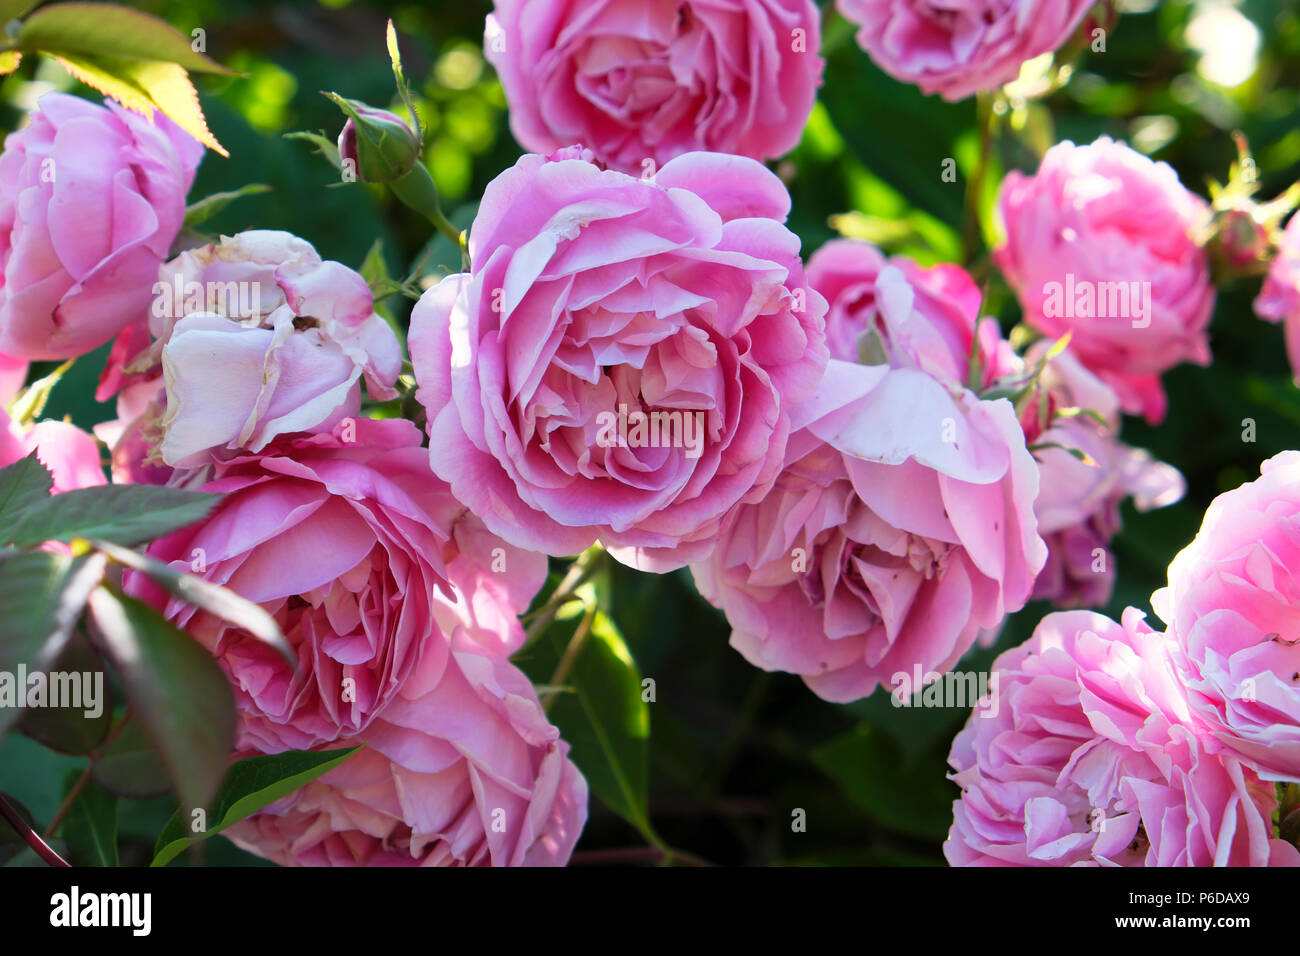 Pink roses in bloom in a rural country garden in a West Wales garden Camarthenshire Dyfed Wales, UK  KATHY DEWITT Stock Photo